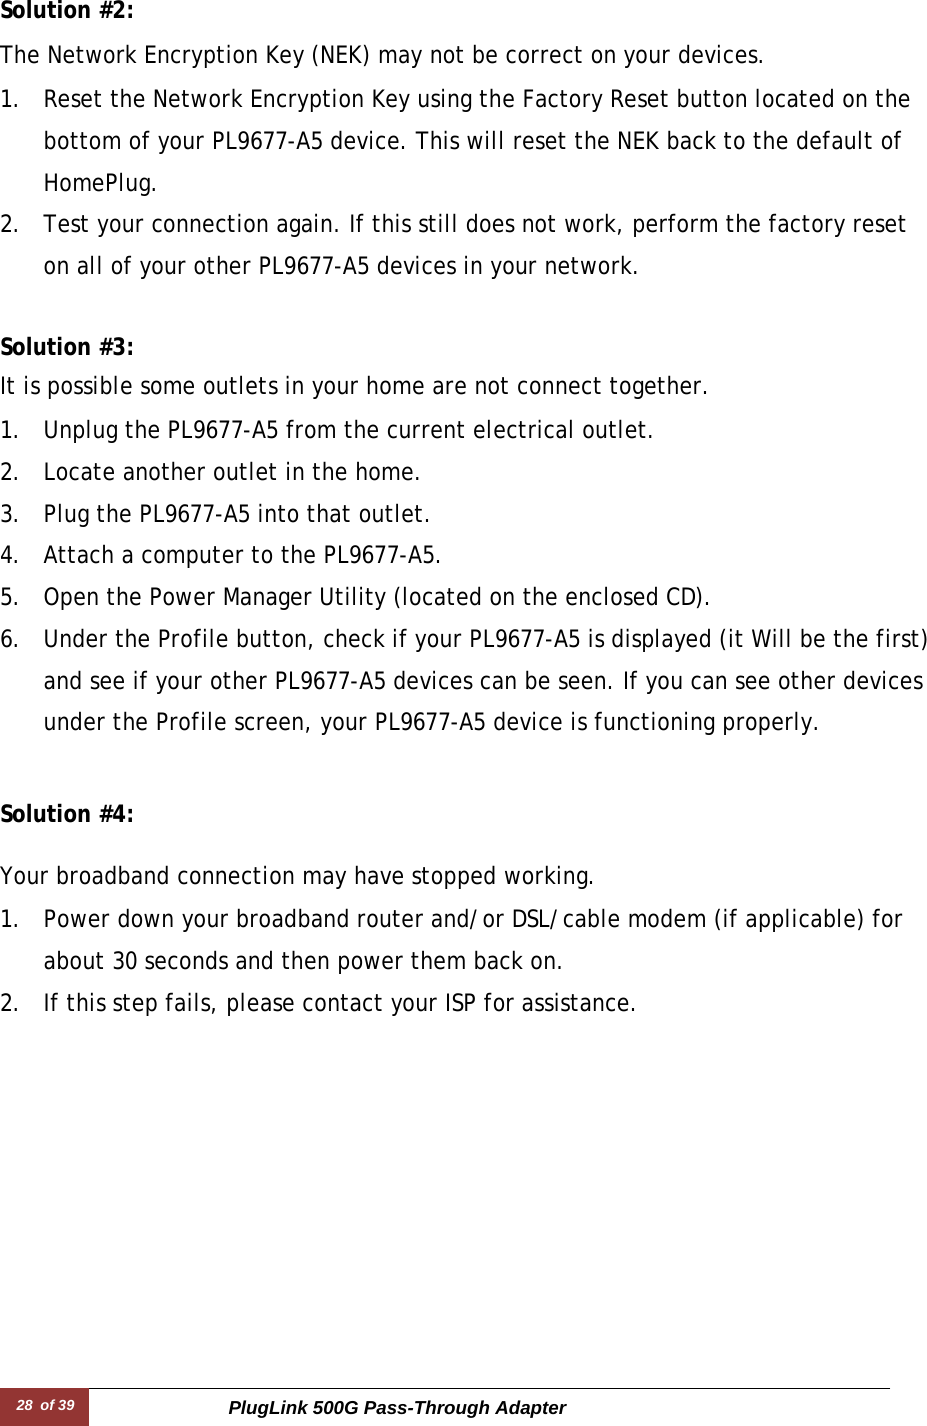 28 of 39 PlugLink 500G Pass-Through Adapter  Solution #2:  The Network Encryption Key (NEK) may not be correct on your devices.  1. Reset the Network Encryption Key using the Factory Reset button located on the bottom of your PL9677-A5 device. This will reset the NEK back to the default of HomePlug. 2. Test your connection again. If this still does not work, perform the factory reset on all of your other PL9677-A5 devices in your network.   Solution #3:  It is possible some outlets in your home are not connect together.  1. Unplug the PL9677-A5 from the current electrical outlet. 2. Locate another outlet in the home. 3. Plug the PL9677-A5 into that outlet. 4. Attach a computer to the PL9677-A5. 5. Open the Power Manager Utility (located on the enclosed CD). 6. Under the Profile button, check if your PL9677-A5 is displayed (it Will be the first) and see if your other PL9677-A5 devices can be seen. If you can see other devices under the Profile screen, your PL9677-A5 device is functioning properly.   Solution #4:  Your broadband connection may have stopped working.  1. Power down your broadband router and/or DSL/cable modem (if applicable) for about 30 seconds and then power them back on. 2. If this step fails, please contact your ISP for assistance. 